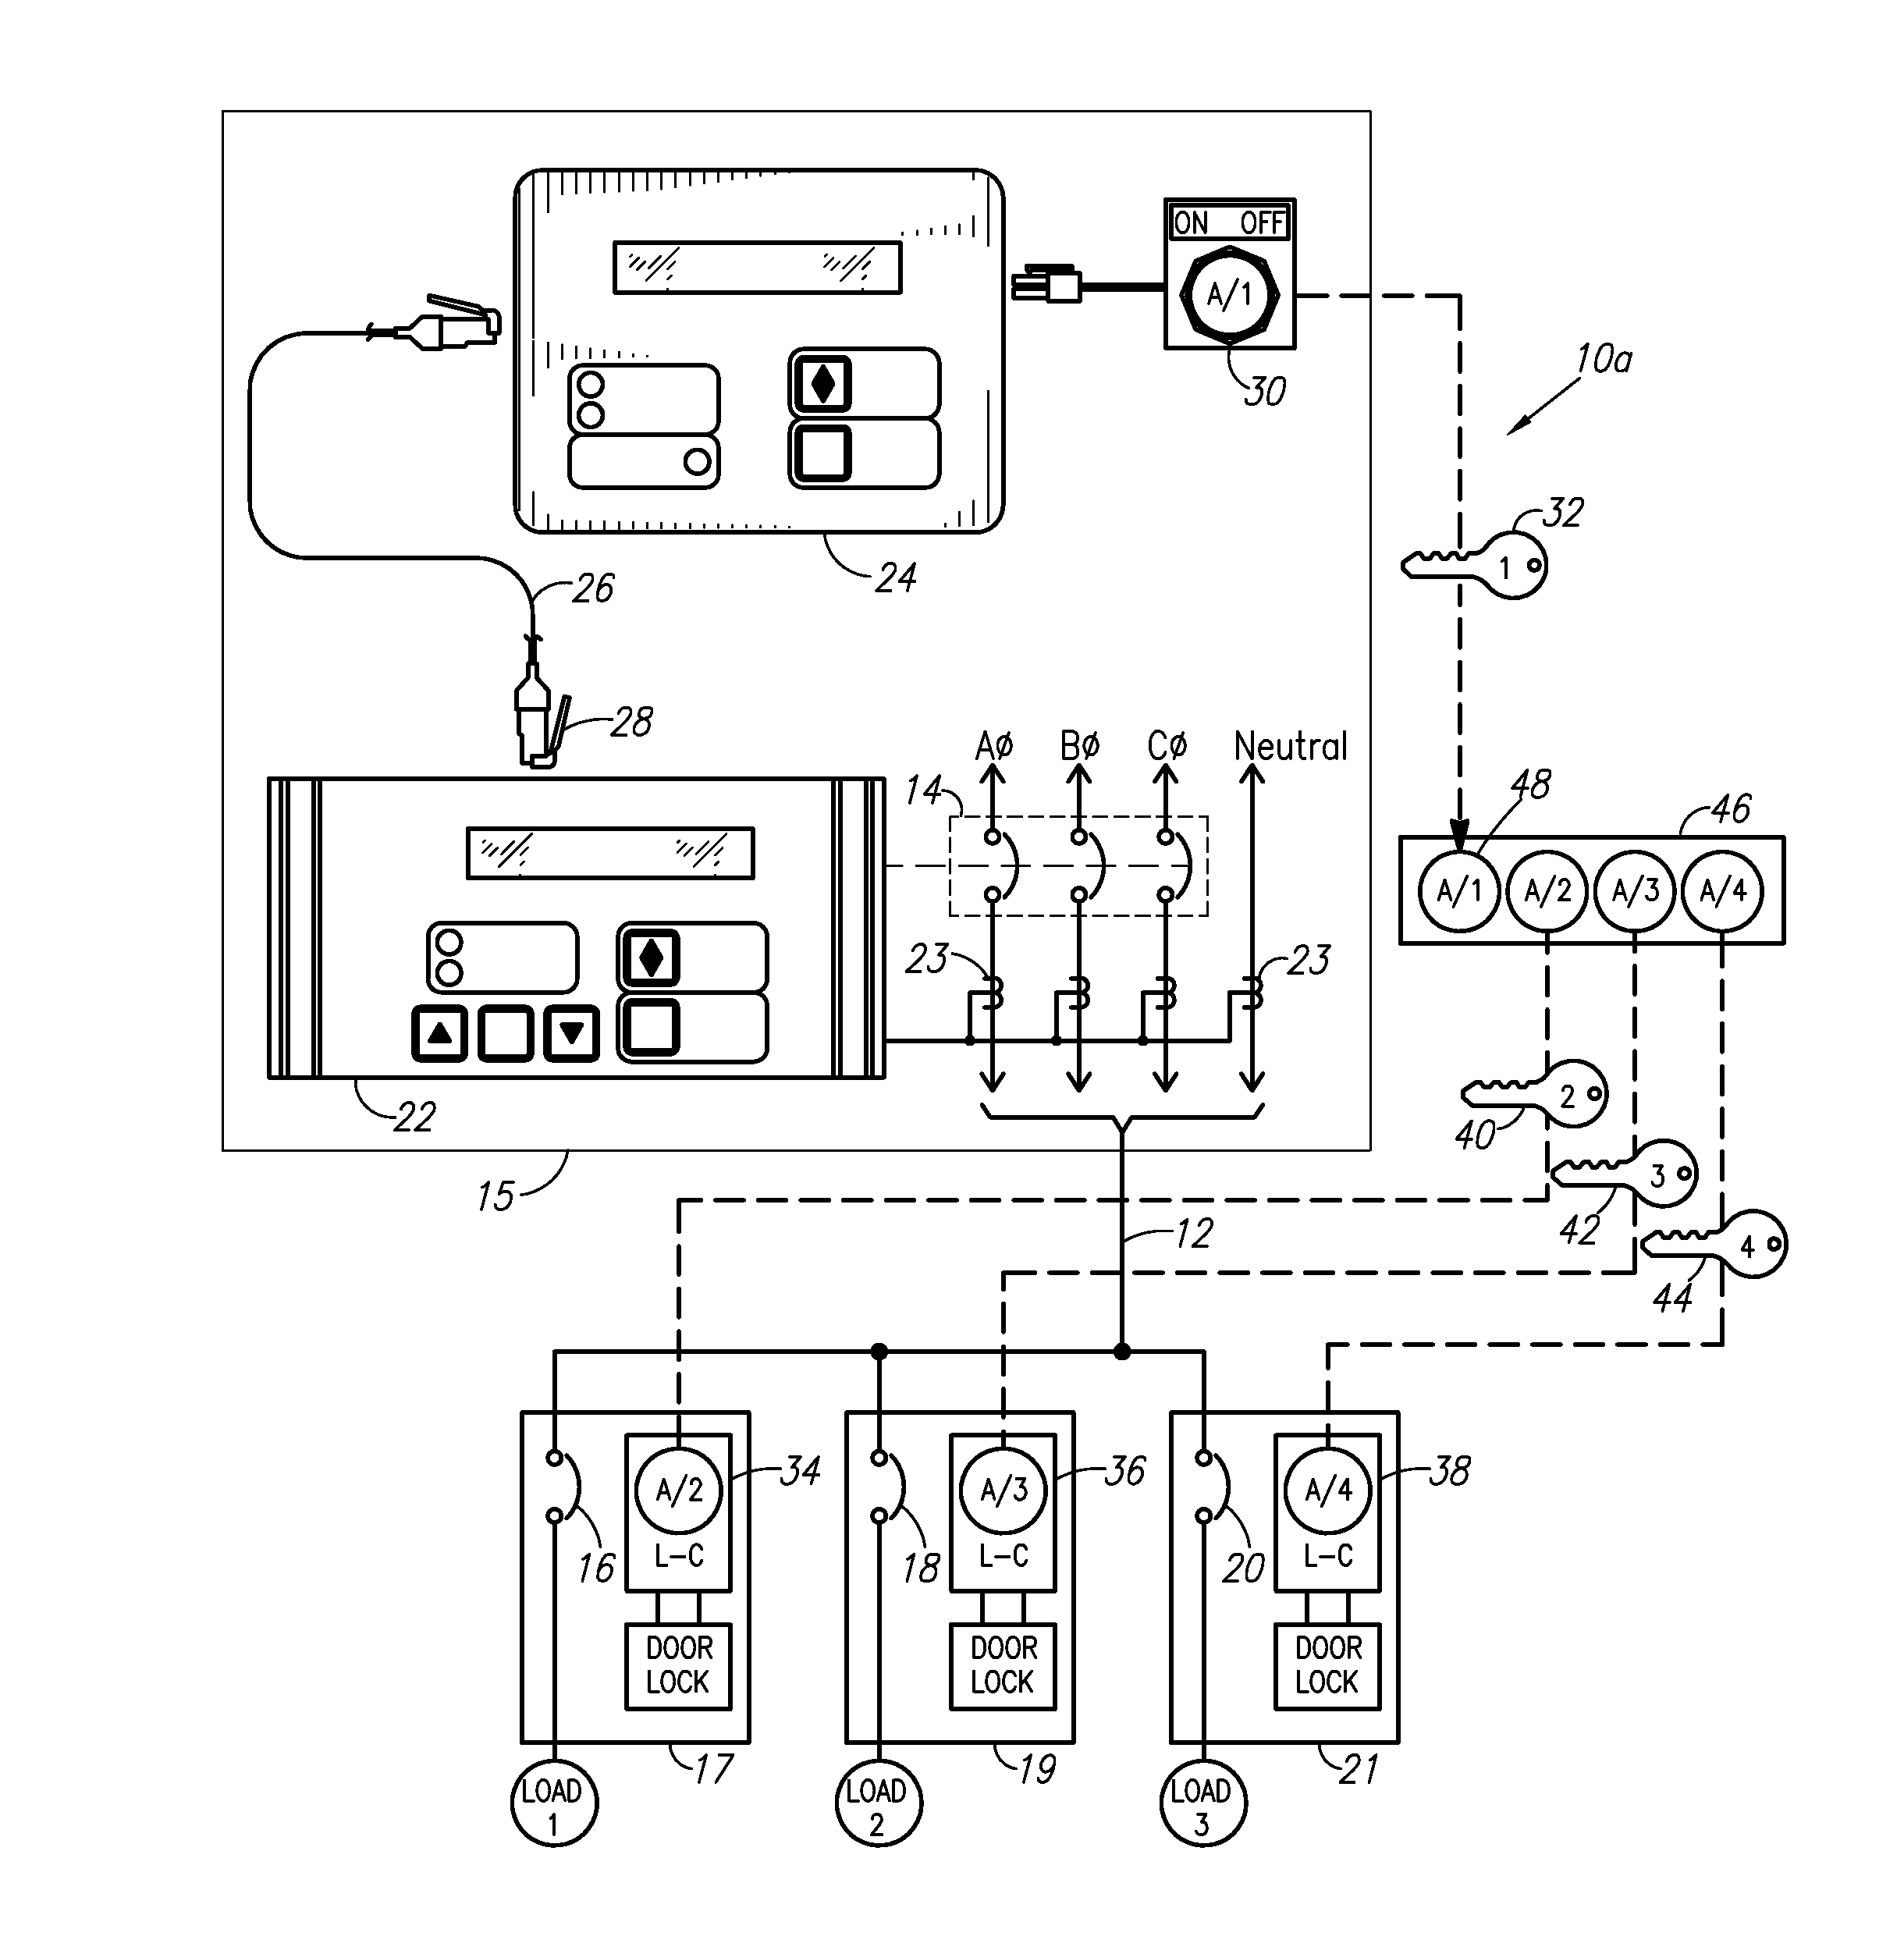 Manually-controlled arc flash energy reduction system and method for circuit breaker trip units